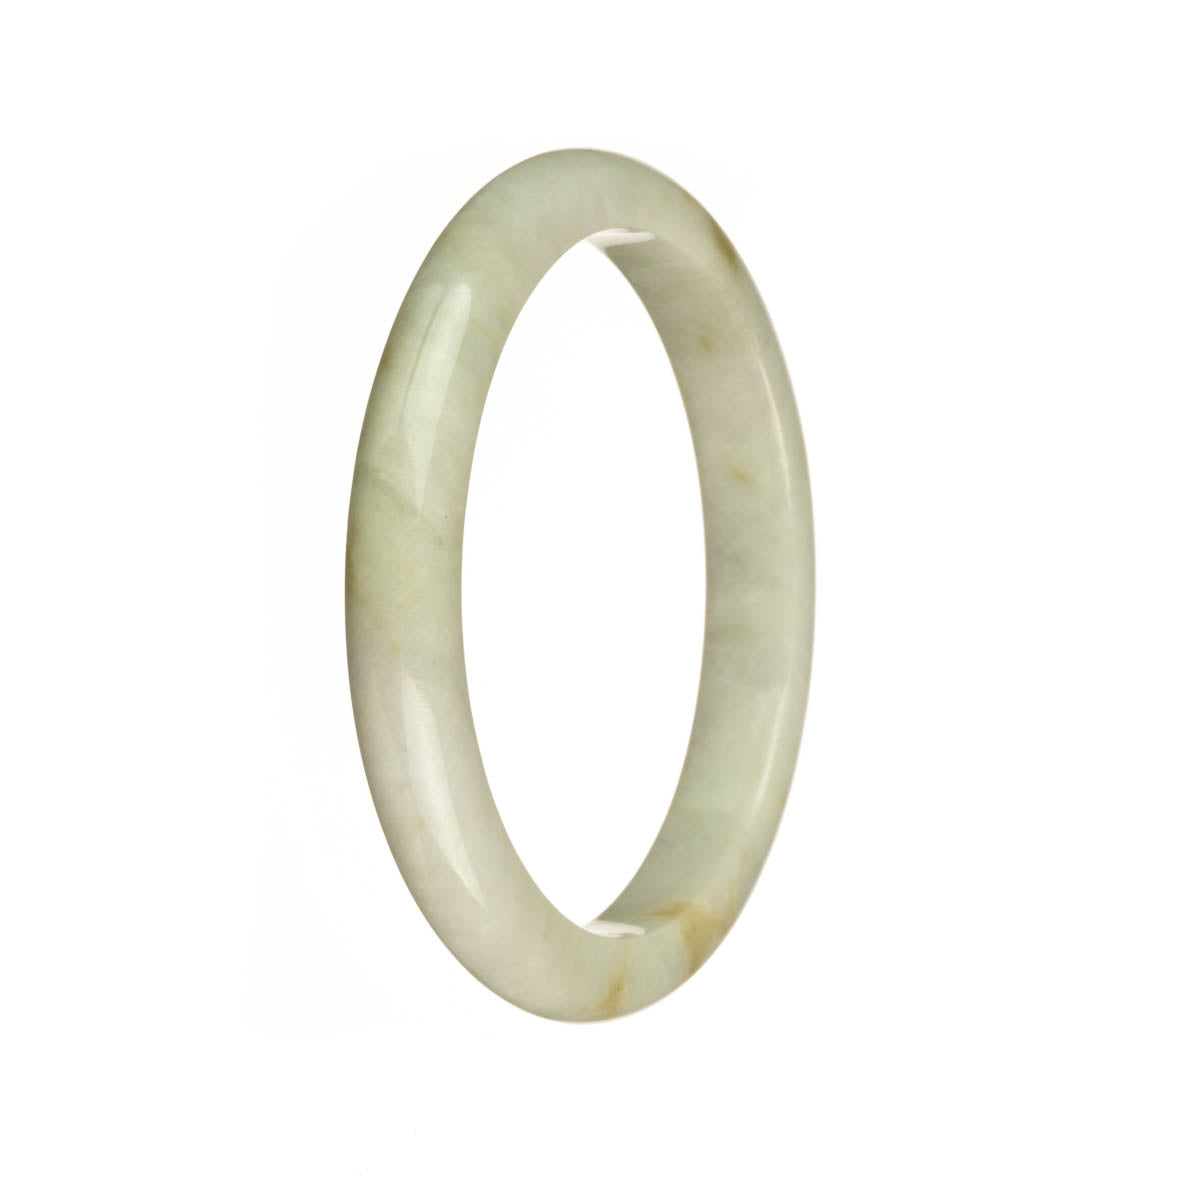 A close-up image of a traditional jade bangle with a white base and brown spots. The bangle is made of genuine Type A jade and has a semi-round shape with a diameter of 56mm. It is a beautiful piece from MAYS GEMS.